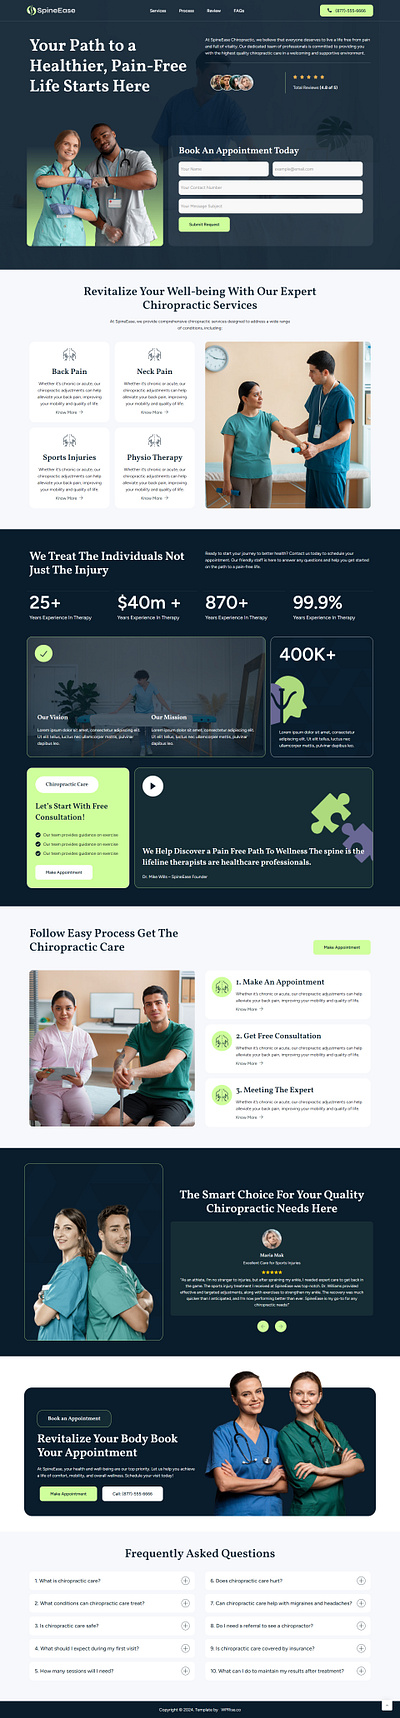 SpineEase – Chiropractic Landing Page for Lead Generation best landing page chiropractic chiropractic landing pages chiropractic website chiropractic website design chiropractic website templates chiropractor chiropractor landing page landing page lead generation landing page